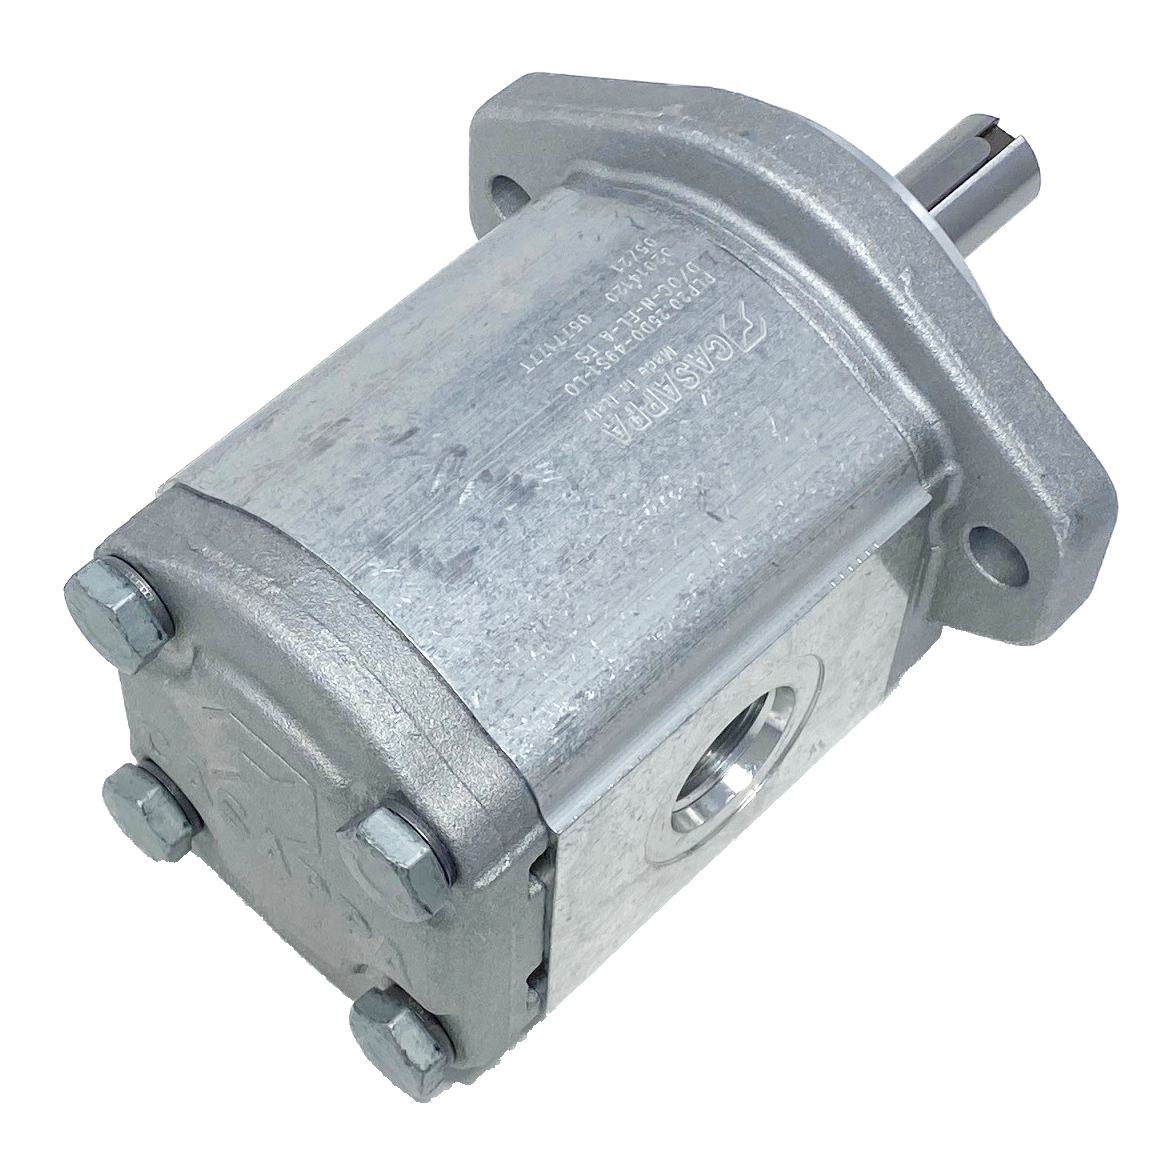 PHM20.27,8B0-49S9-LOC/OG-N-EL : Casappa Polaris Gear Motor, 28.21cc, 2900psi Rated, 2500RPM, Reversible Interior Drain, 3/4" Bore x 3/16" Key Shaft, SAE A 2-Bolt Flange, 0.625 (5/8") #10 SAE Inlet, 1.25" #20 SAE Outlet, Cast Iron Body, Aluminum Flange